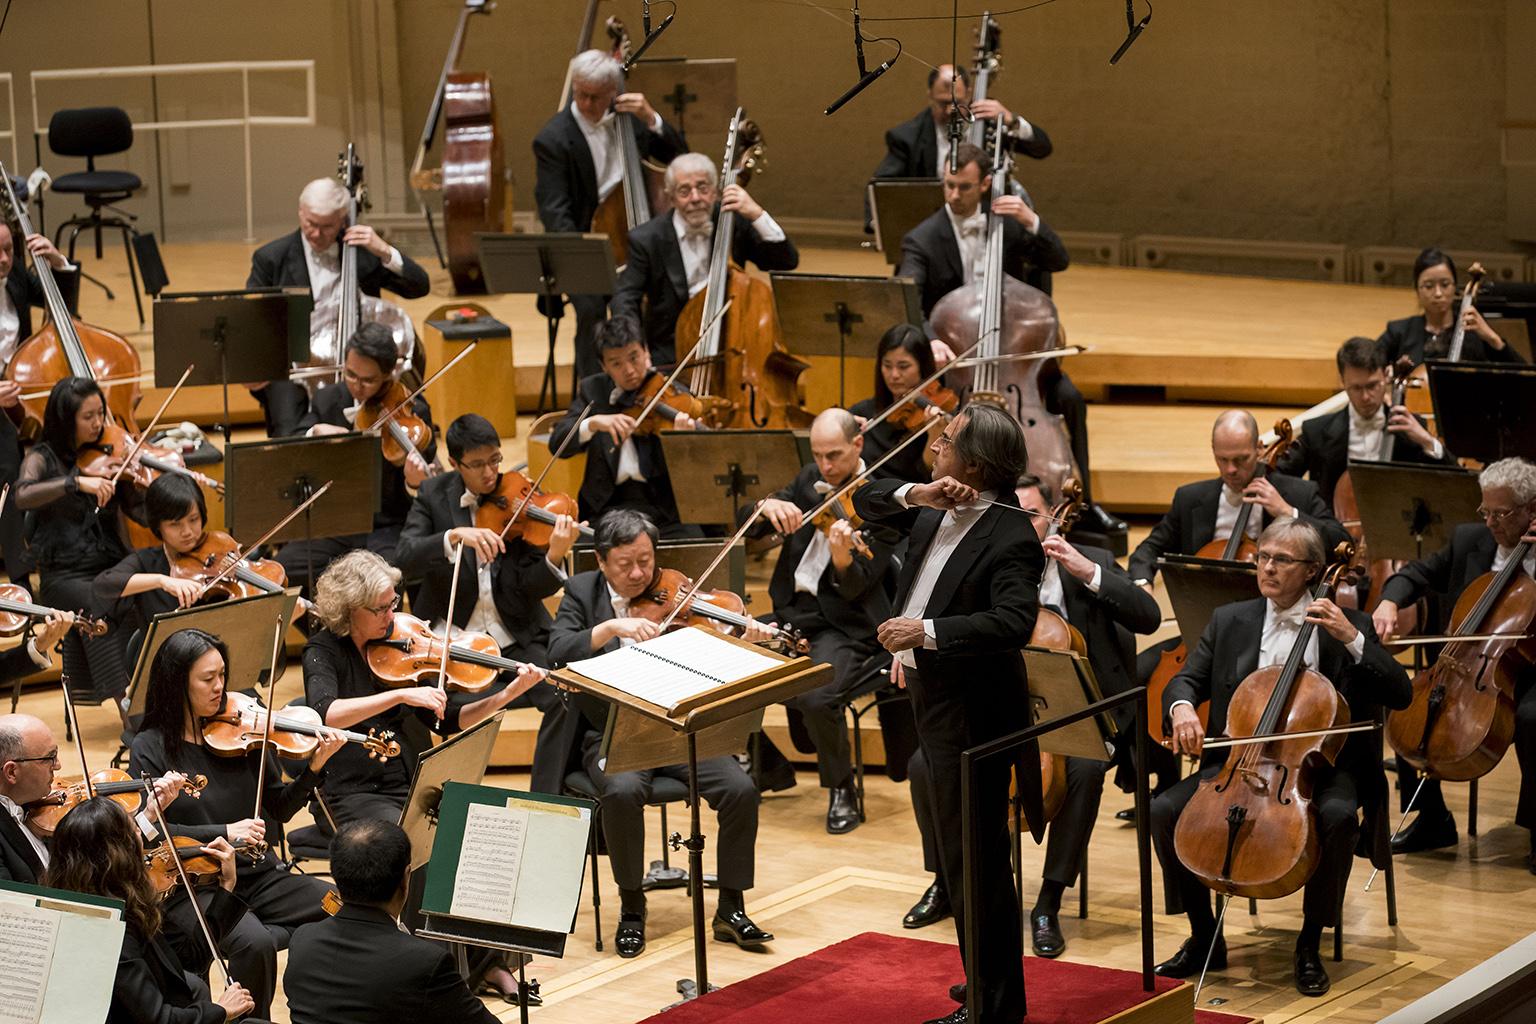 Zell Music Director Riccardo Muti leads the CSO in Beethoven’s Overture to “Egmont” on Oct. 4, 2018. (Credit: Todd Rosenberg)